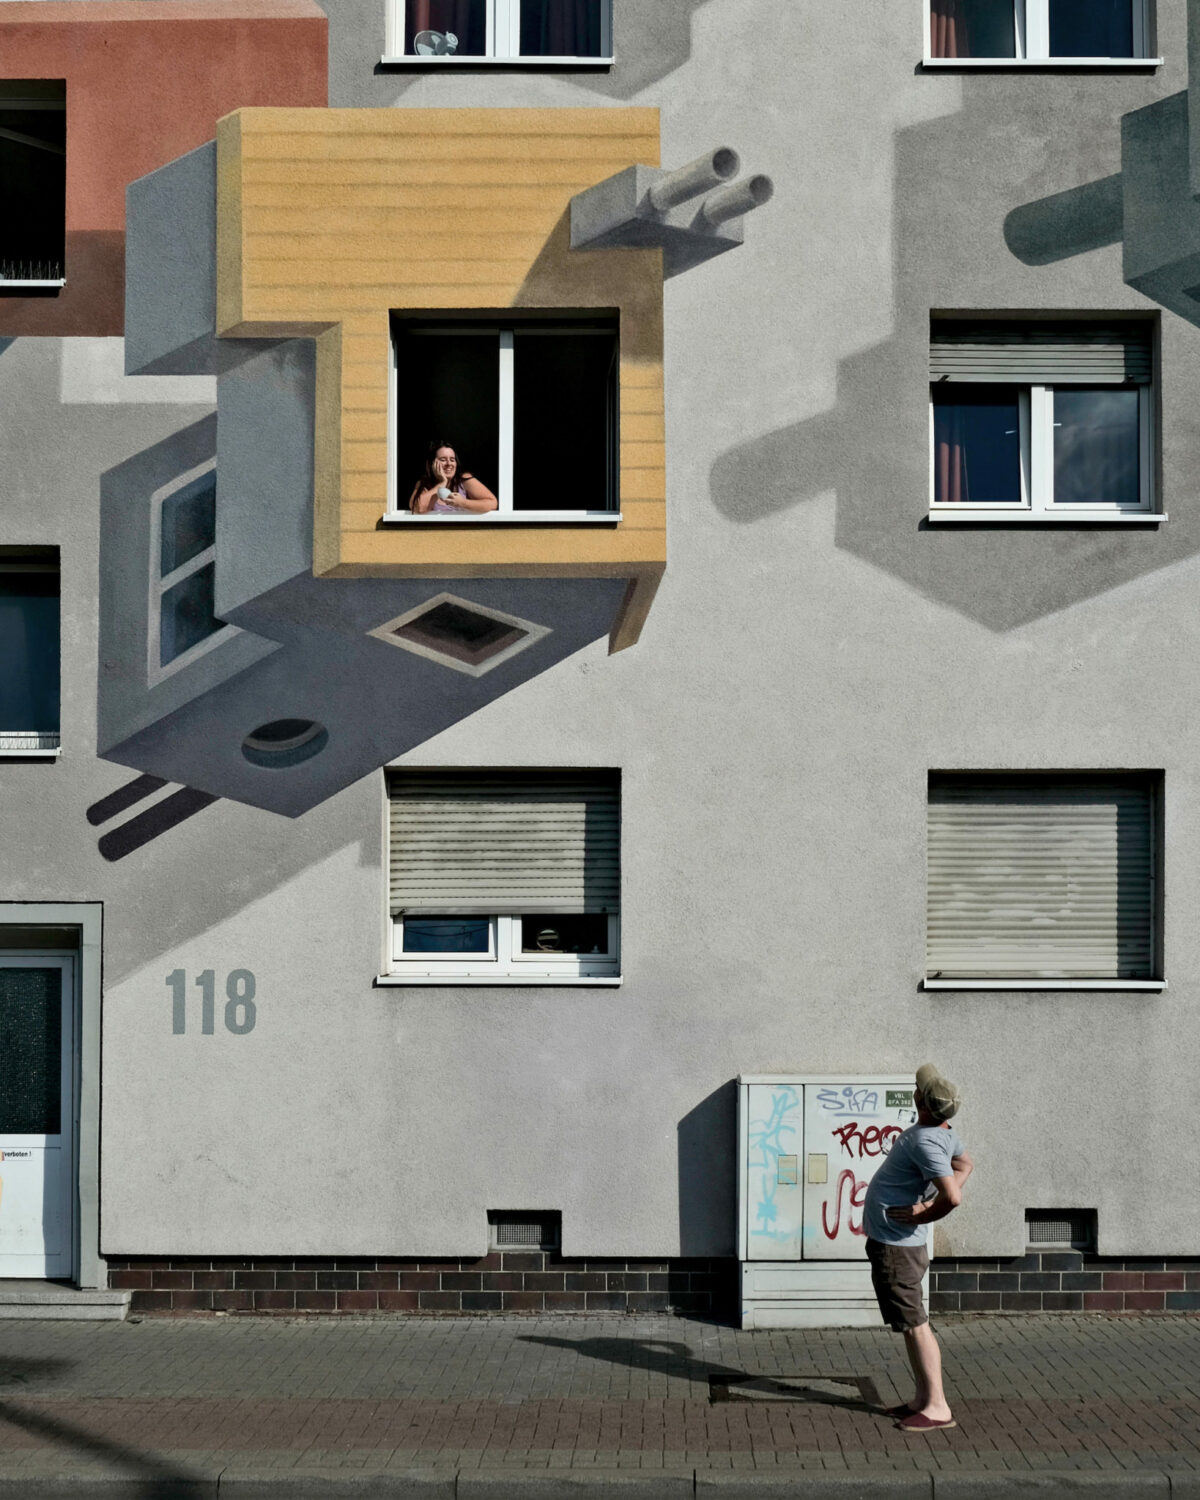 Surreal Murals Of Floating Objects And Distorted Architectural Structures By Cinta Vidal (4)